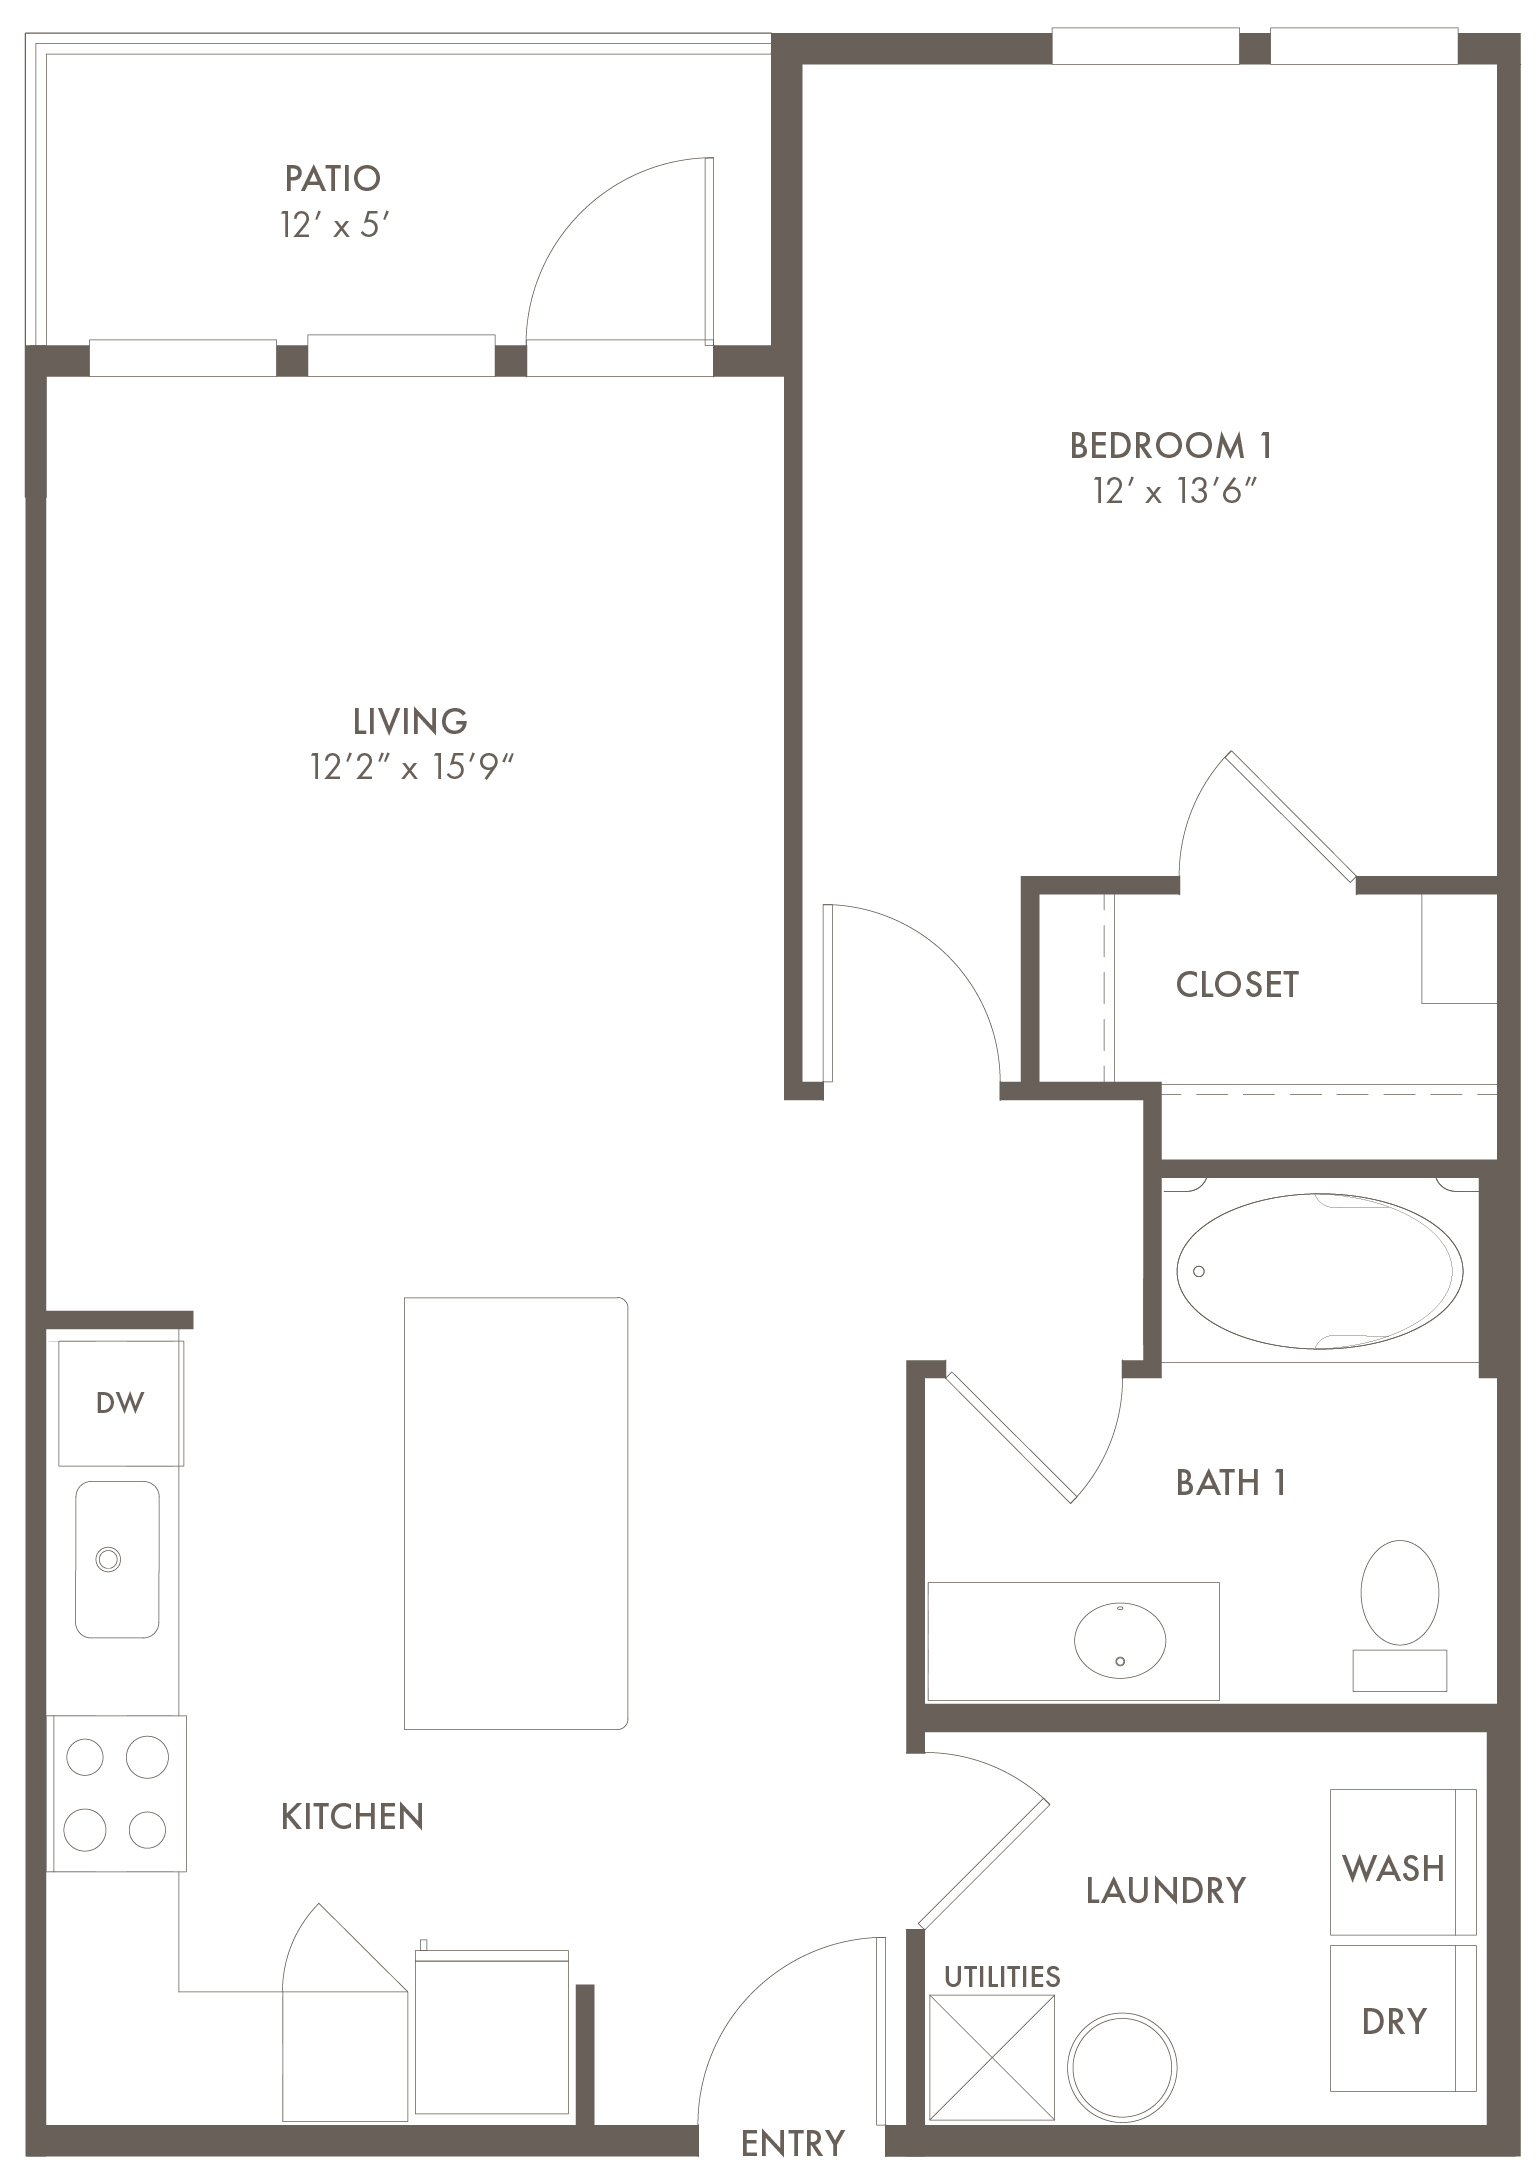 A A1 unit with 1 Bedrooms and 1 Bathrooms with area of 756 sq. ft